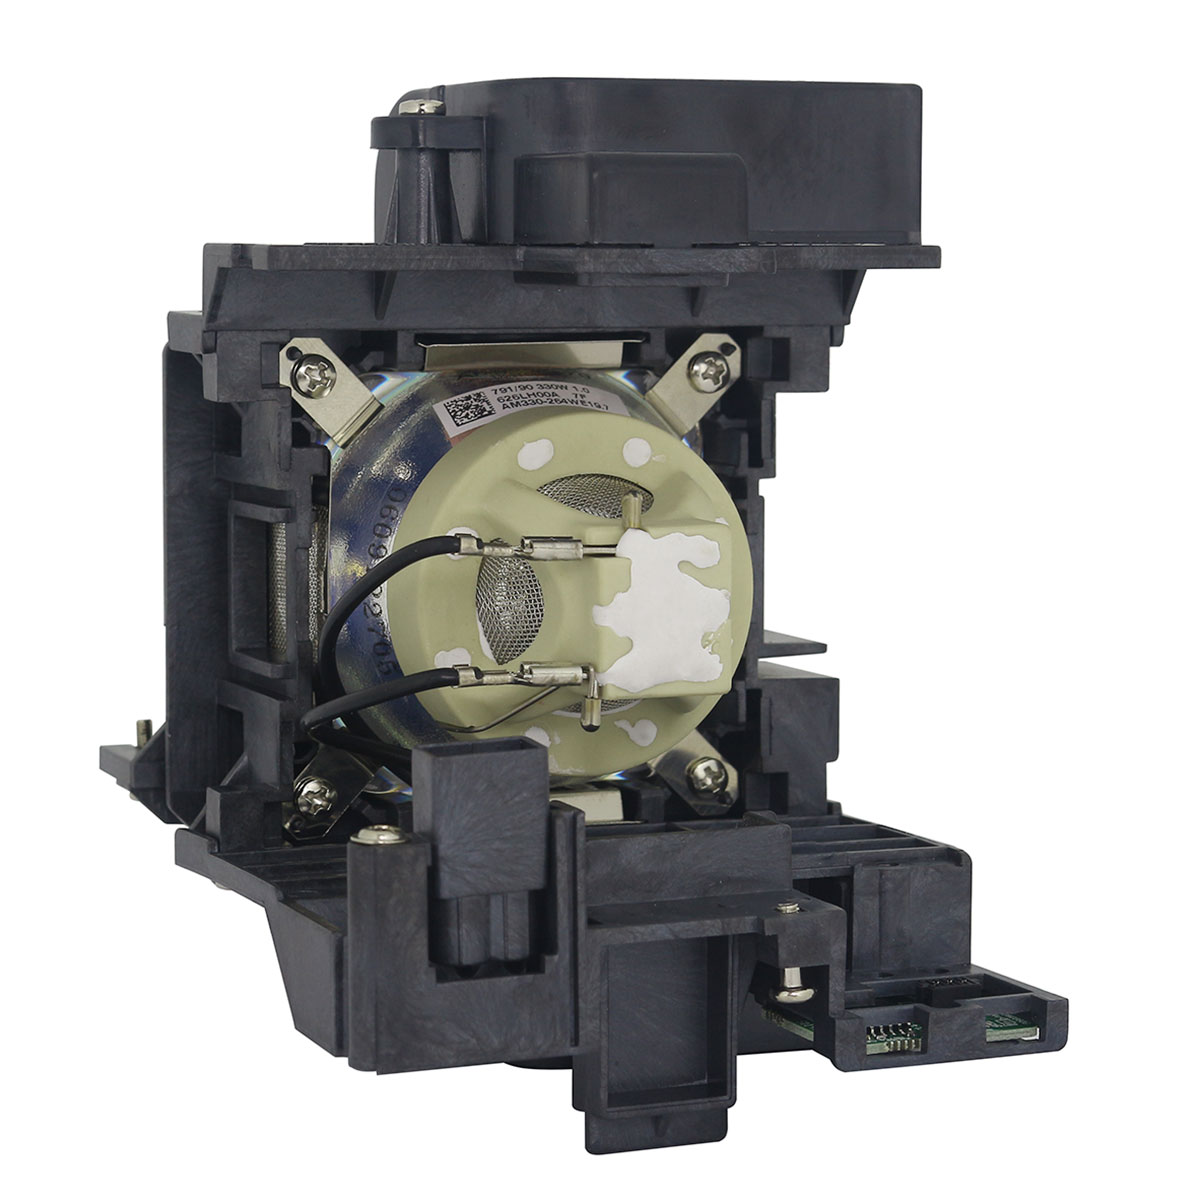 OEM ET-LAE200 Replacement Lamp & Housing for Panasonic Projectors - image 5 of 7